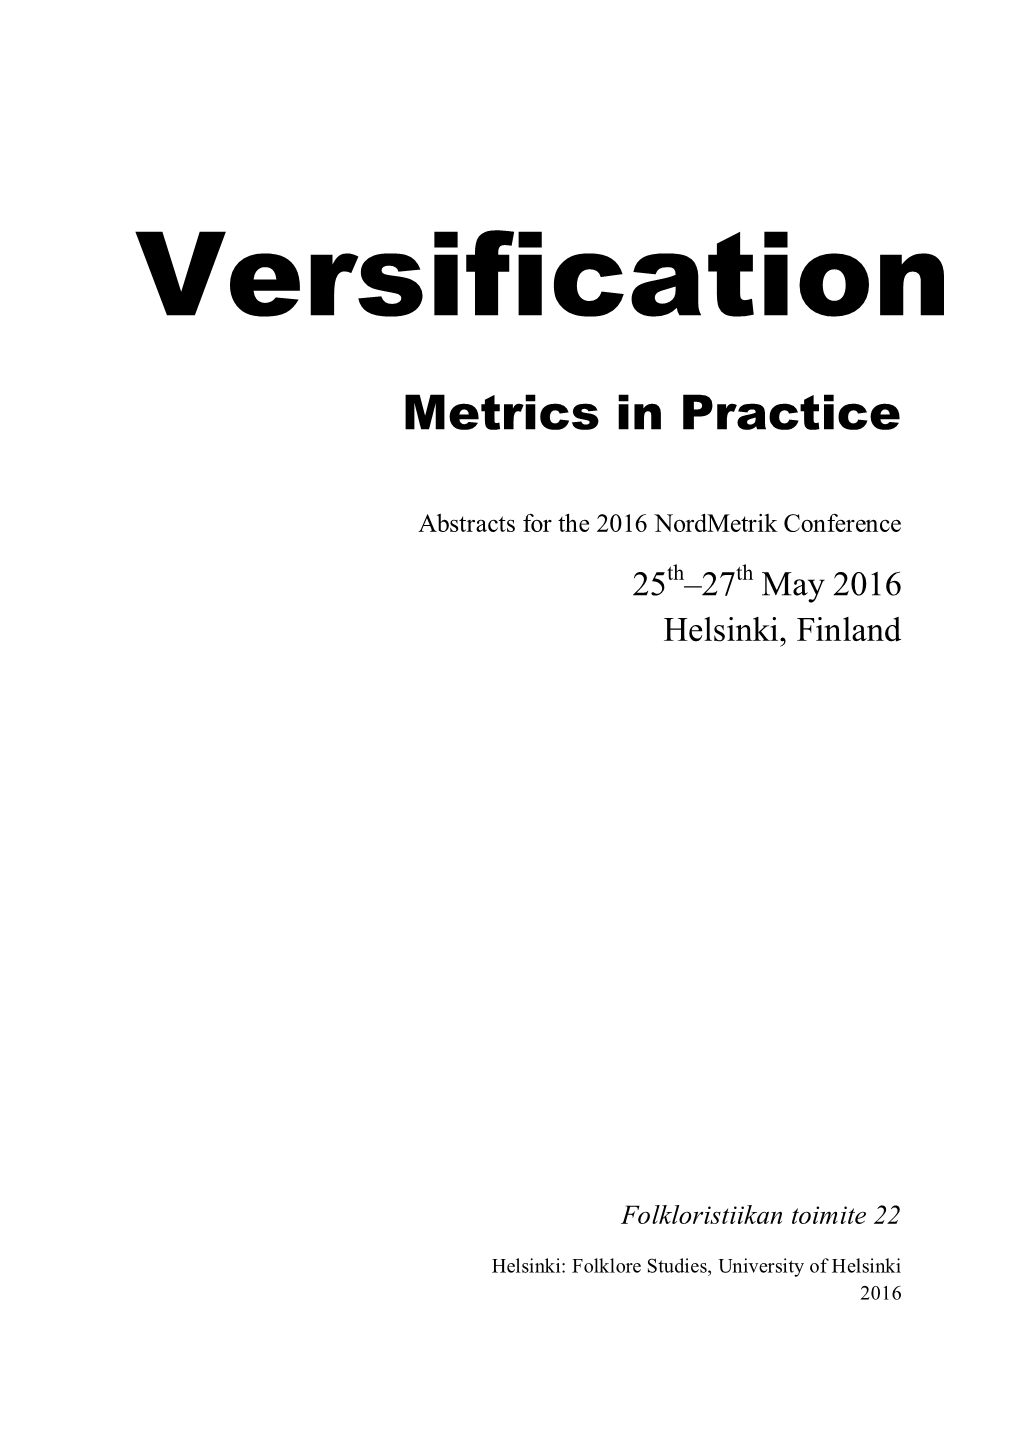 VERSIFICATION: METRICS in PRACTICE Is an International, Multidisciplinary Conference to Be Held 25Nd–27Th May 2016, at the University of Helsinki, Helsinki, Finland